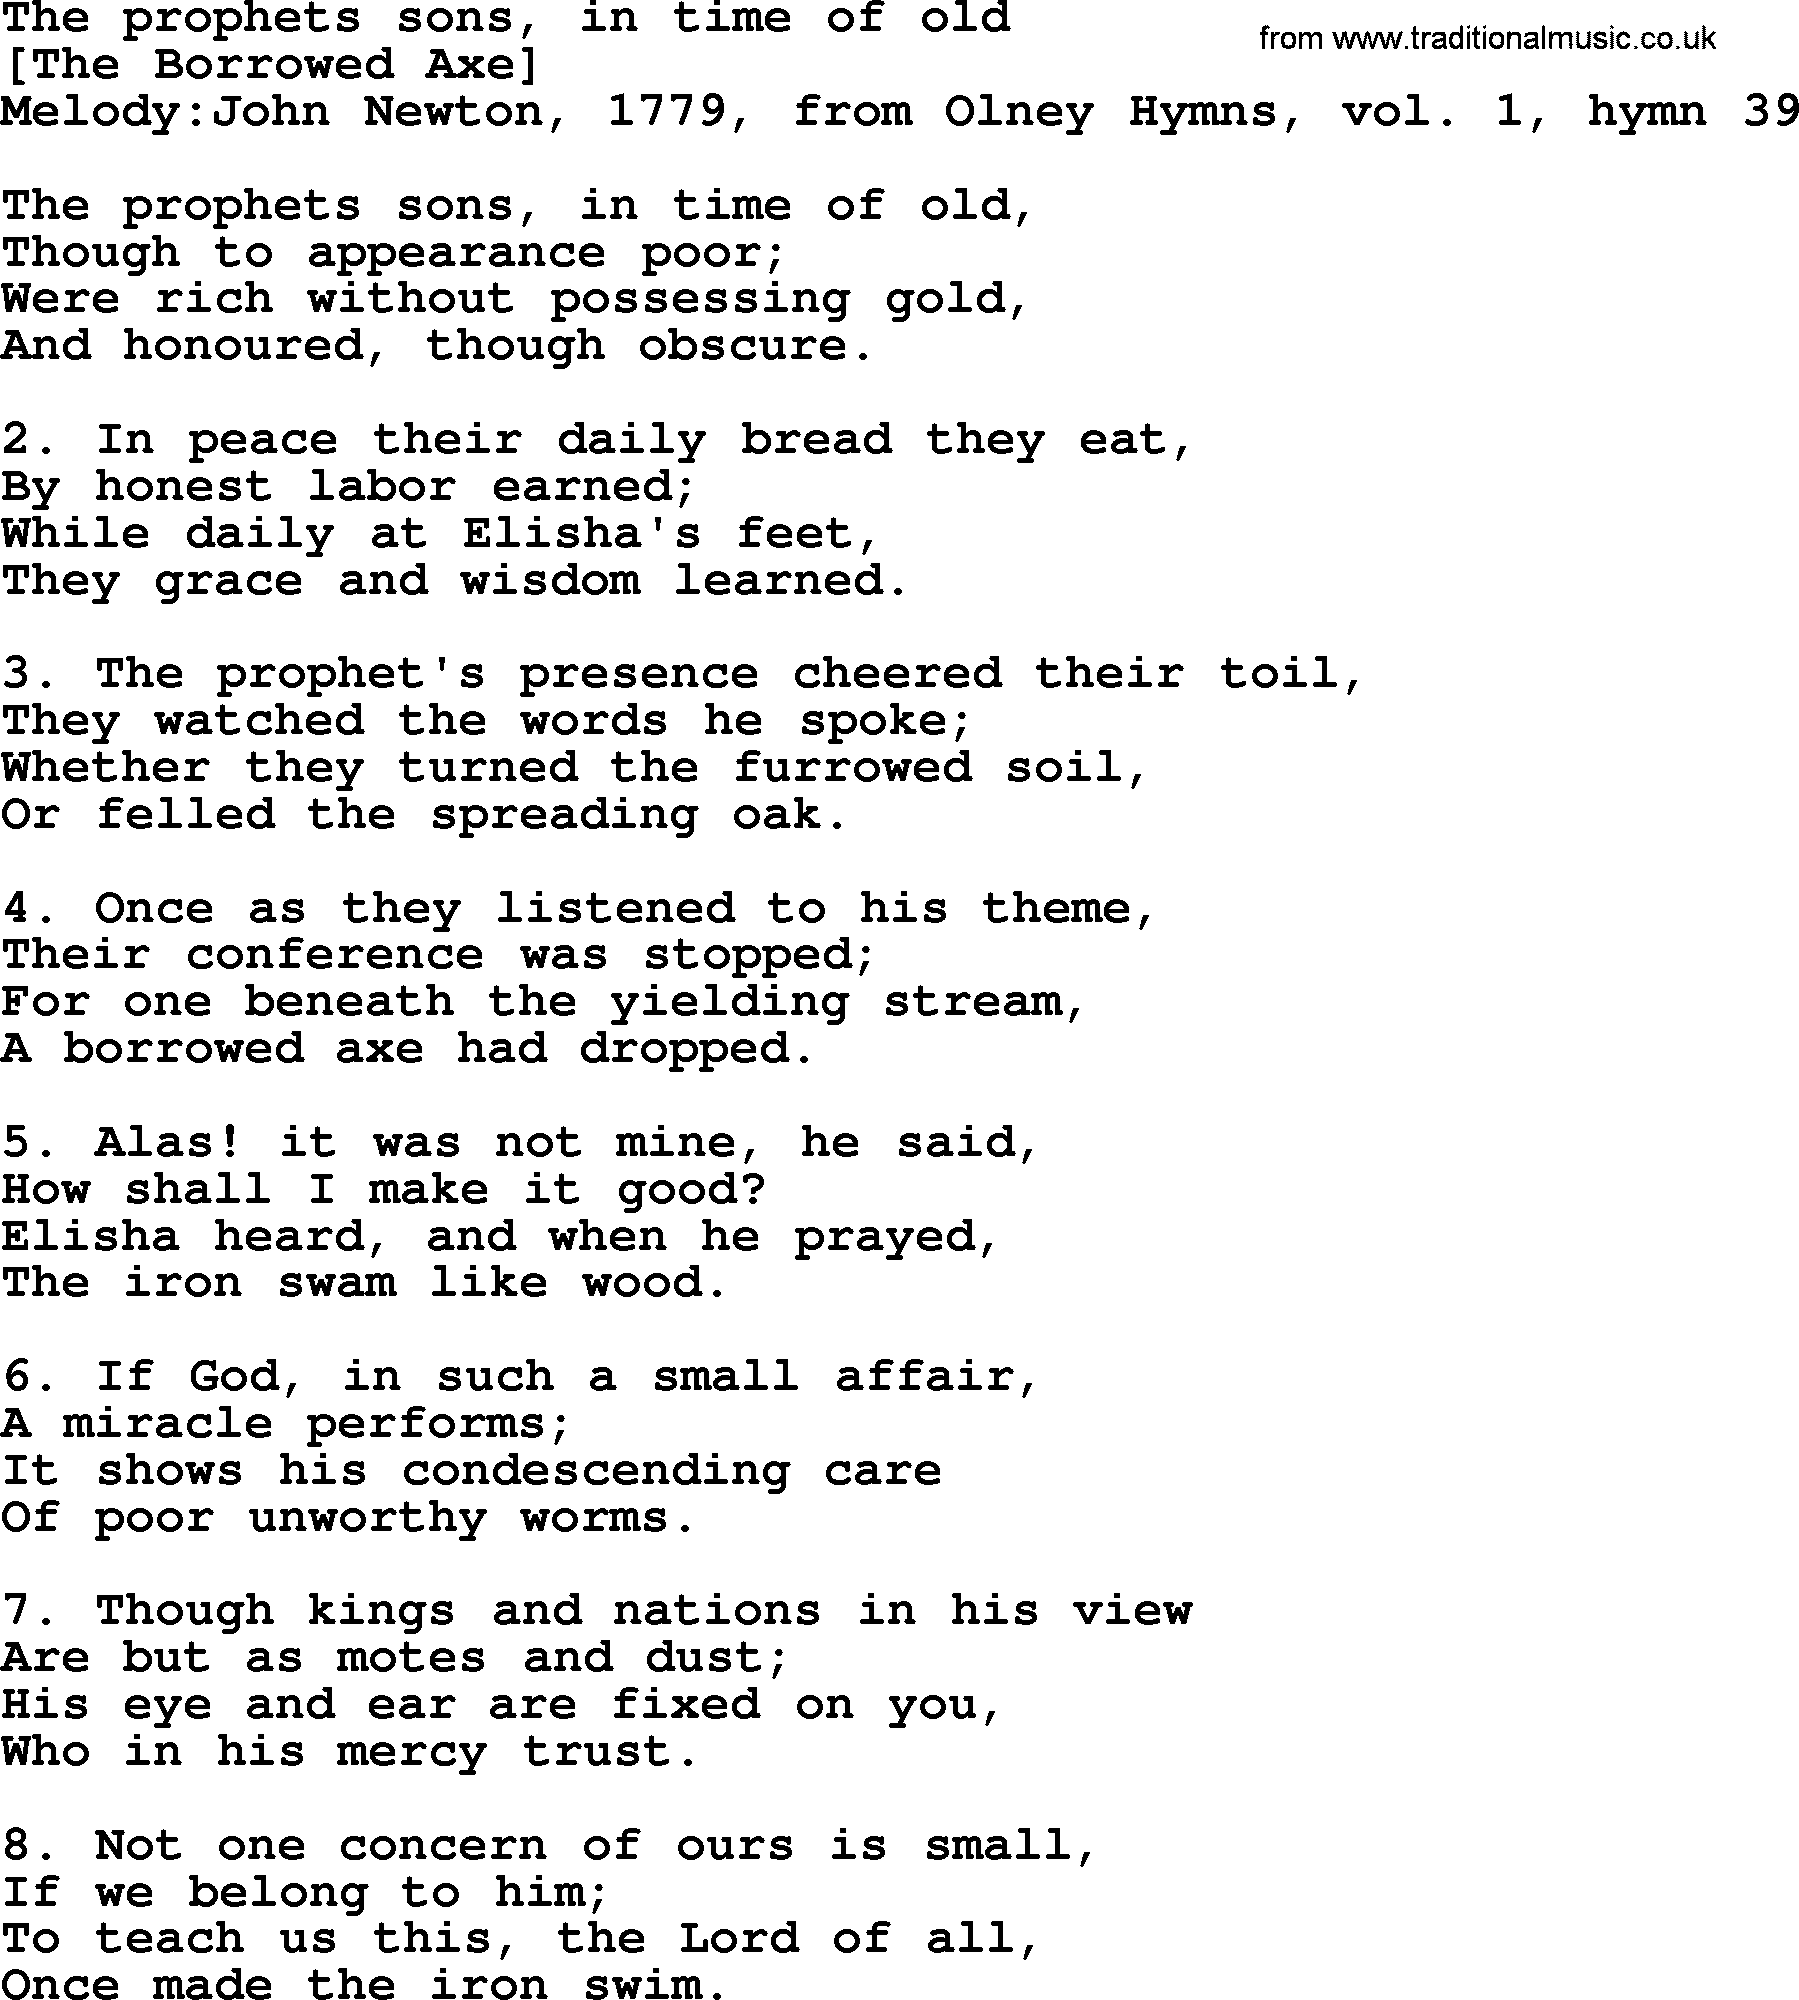 Old English Song: The Prophets Sons, In Time Of Old lyrics